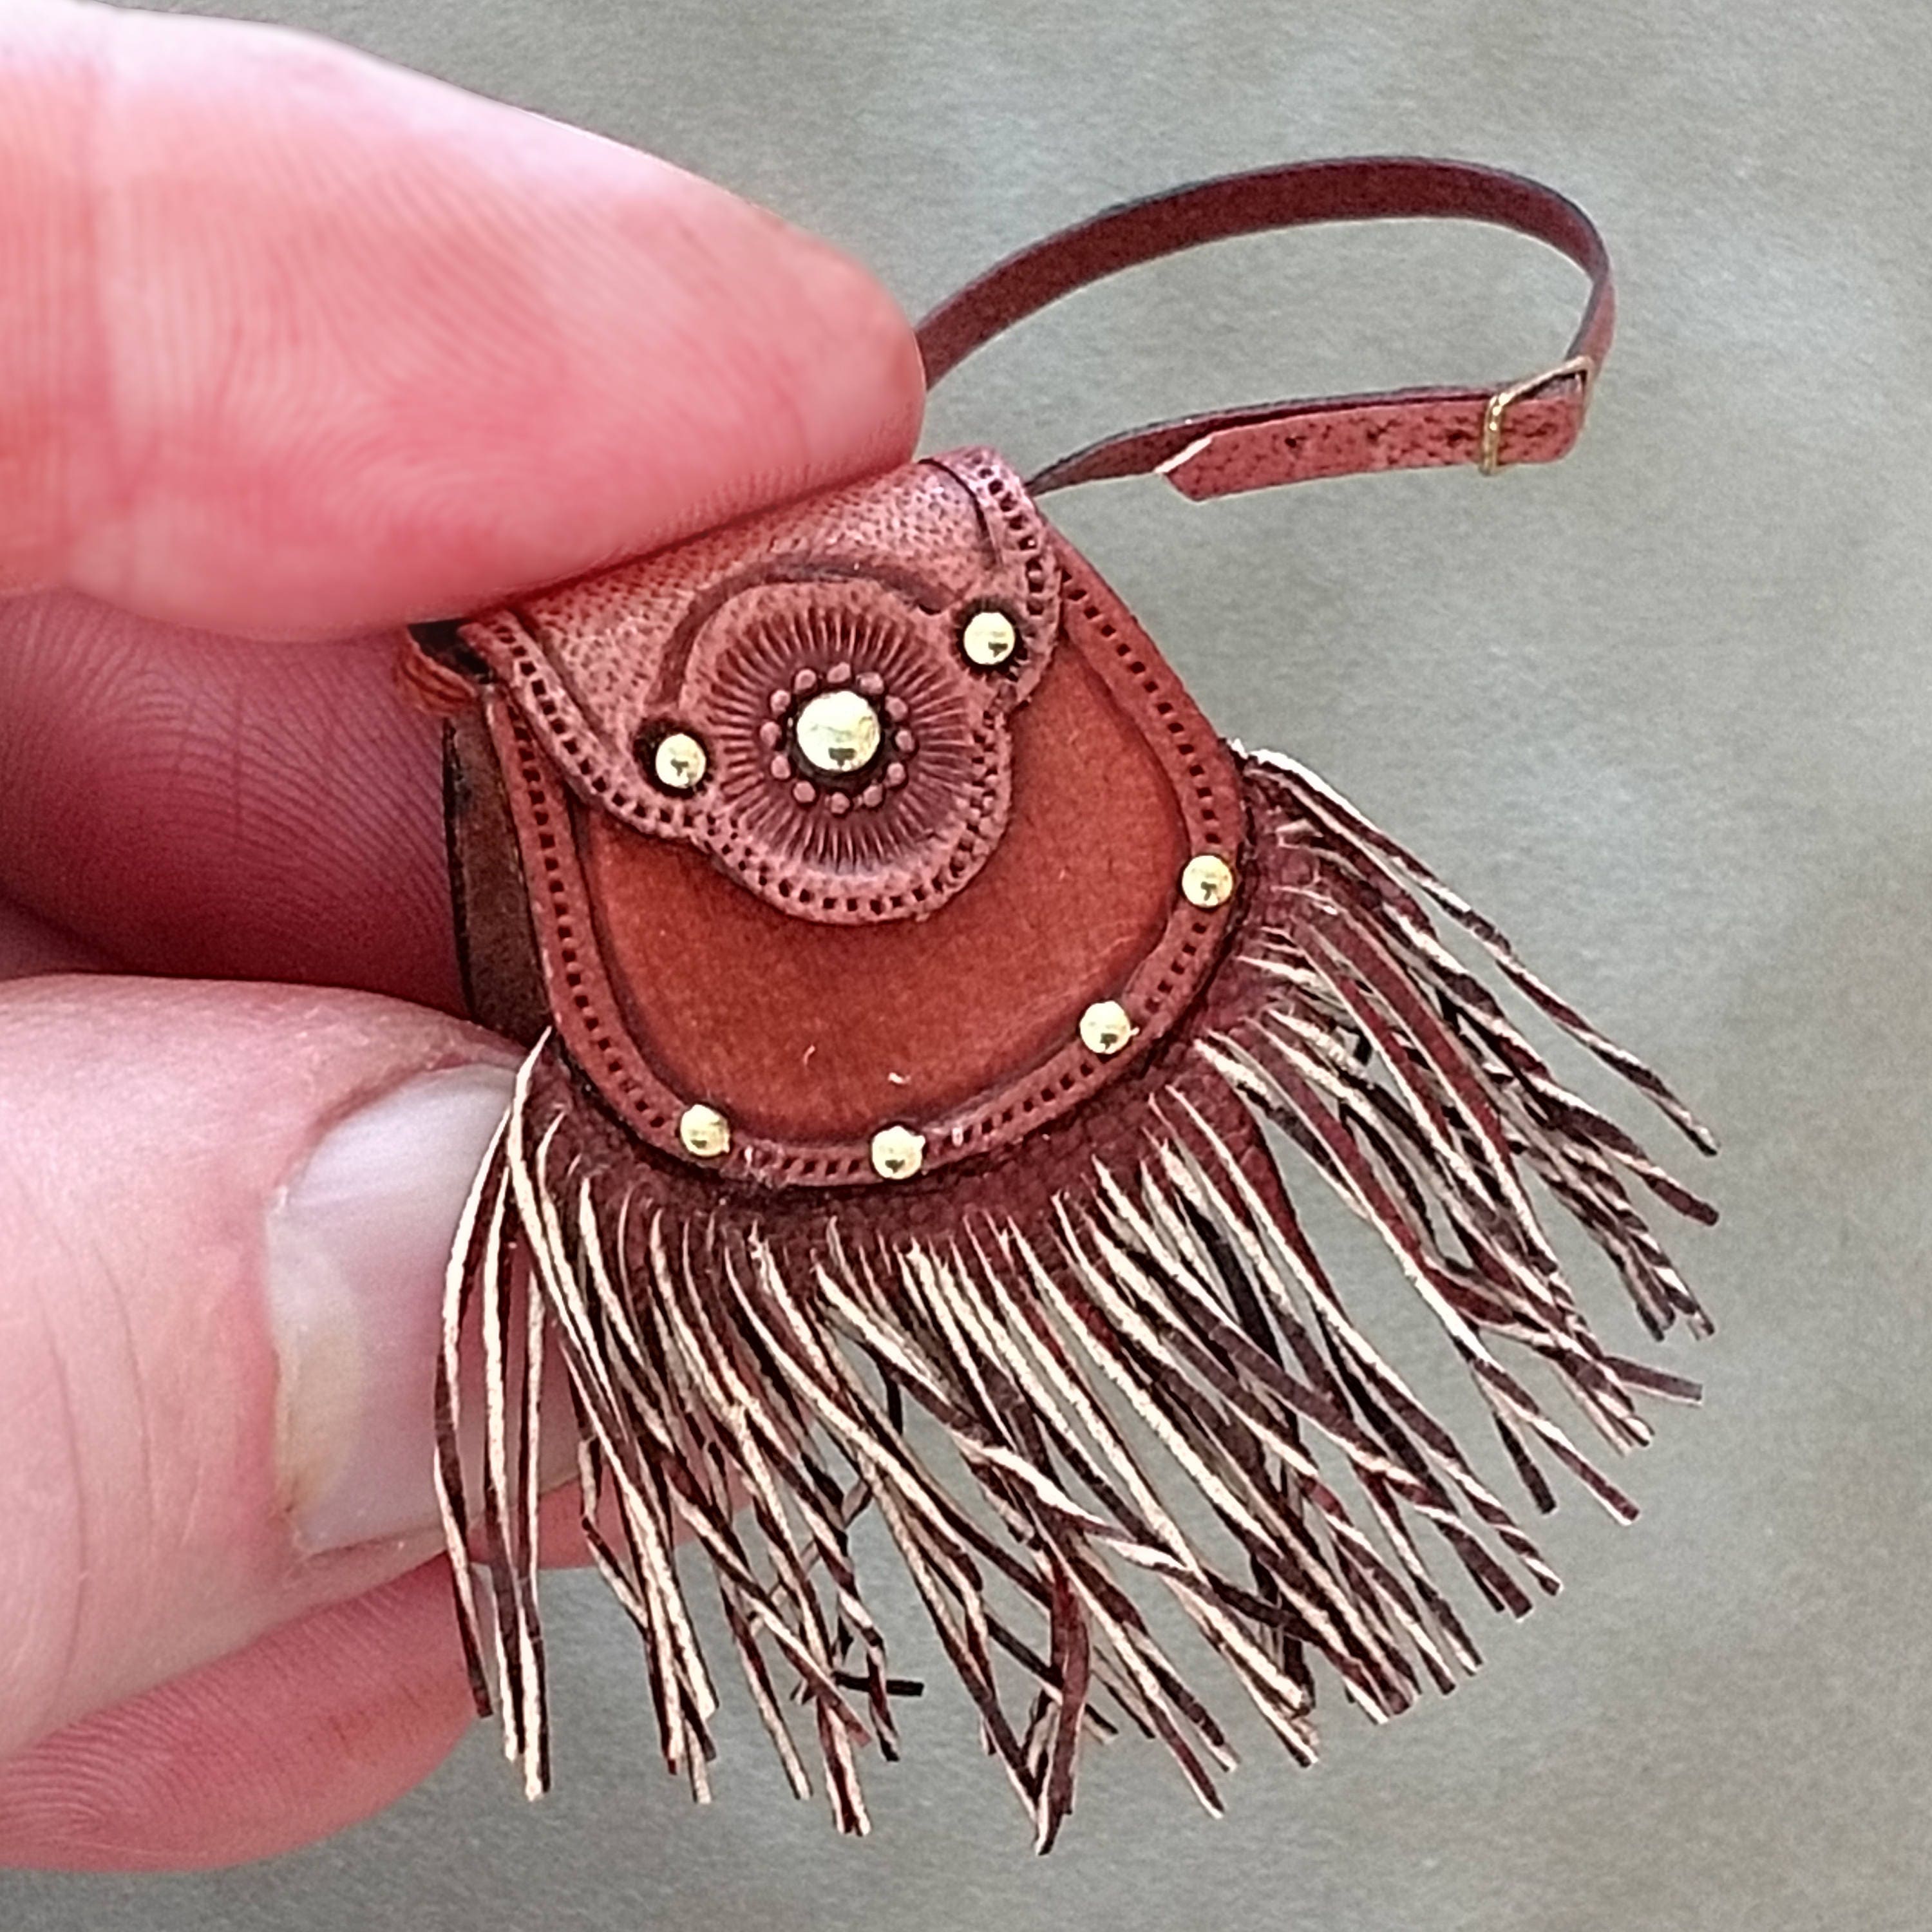 Miniature Leather Western Fringed Bag-MADE TO ORDER